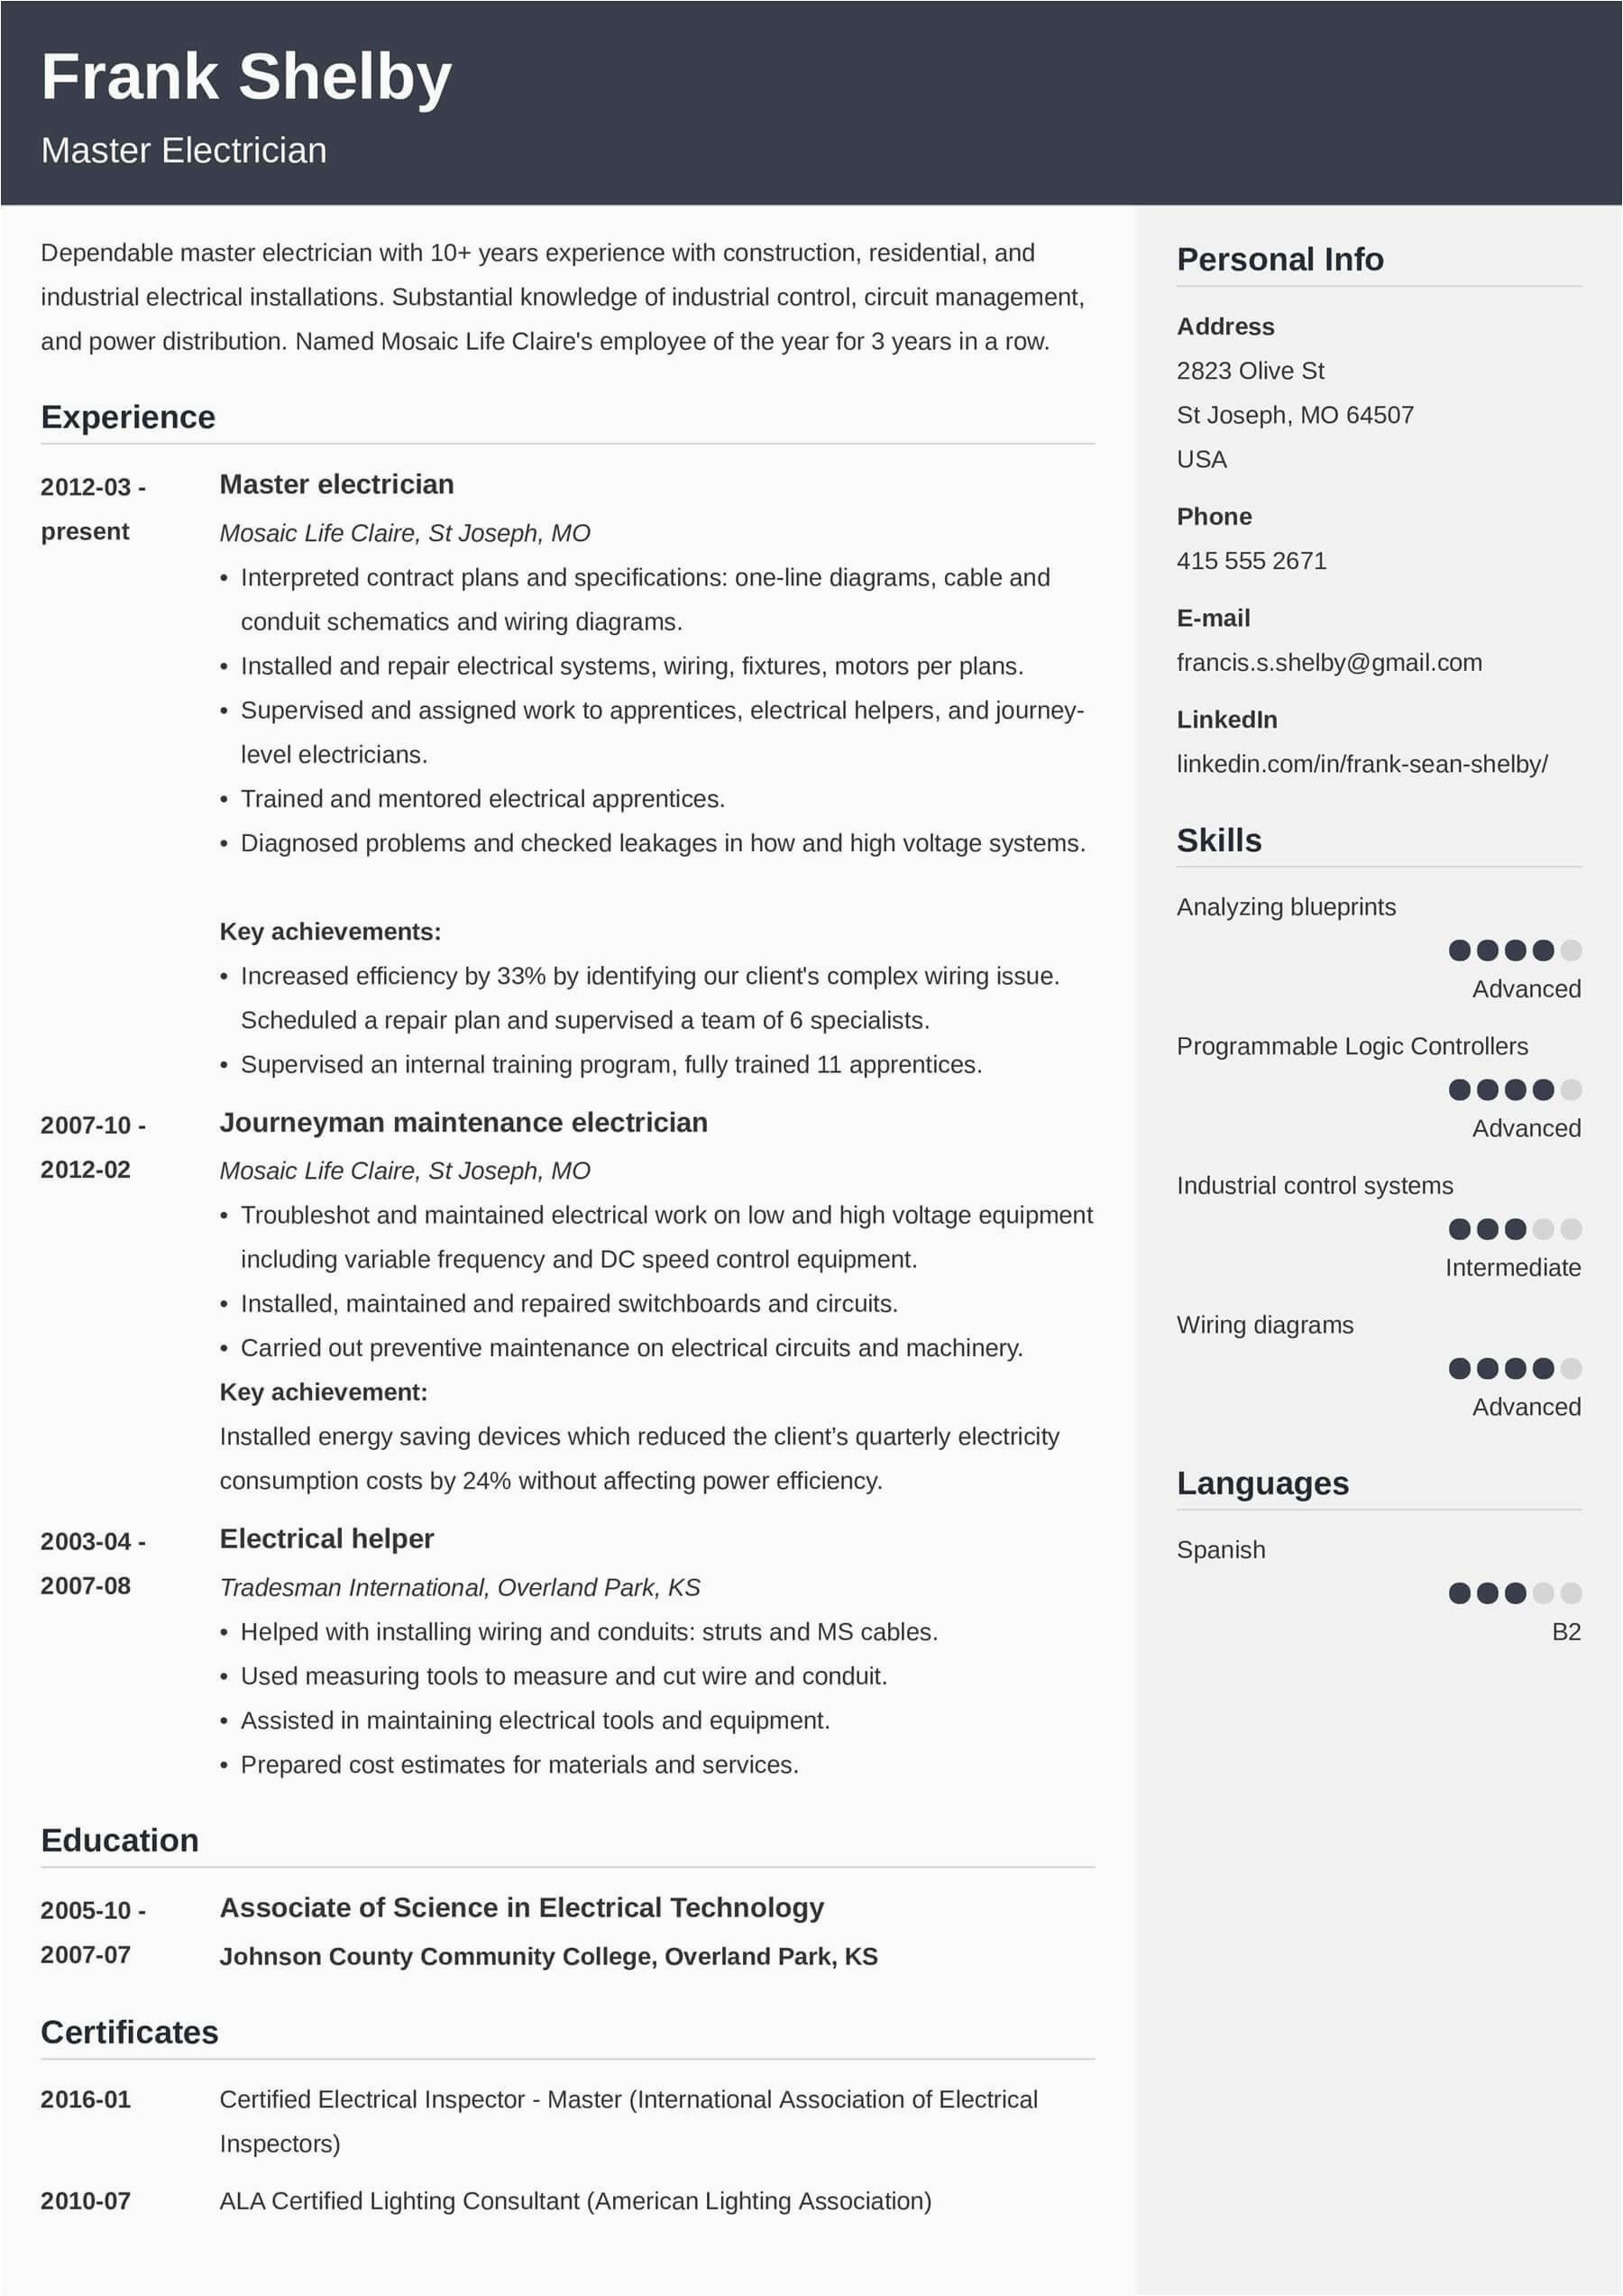 Samples Of Different Styles Of Resumes Current Resume Styles—find the Best E <div id='gallery-1' class='gallery galleryid-70428 gallery-columns-3 gallery-size-thumbnail'><figure class='gallery-item'>
			<div class='gallery-icon portrait'>
				<a href='https://www.naturestudycentre.org/samples-of-different-styles-of-resumes-2/samples-of-different-styles-of-resumes-9-best-different-types-of-resumes-formats-sample/'><img width="116" height="150" src="https://www.naturestudycentre.org/wp-content/uploads/2022/09/samples-of-different-styles-of-resumes-9-best-different-types-of-resumes-formats-sample-of-samples-of-different-styles-of-resumes.jpg" class="attachment-thumbnail size-thumbnail" alt="Samples Of Different Styles Of Resumes 9 Best Different Types Of Resumes formats Sample" decoding="async" loading="lazy" aria-describedby="gallery-1-70429" /></a>
			</div>
				<figcaption class='wp-caption-text gallery-caption' id='gallery-1-70429'>
				9 best different types of resumes formats sample
				</figcaption></figure><figure class='gallery-item'>
			<div class='gallery-icon portrait'>
				<a href='https://www.naturestudycentre.org/samples-of-different-styles-of-resumes-2/samples-of-different-styles-of-resumes-current-resume-styles-find-the-best-e-gallery-tips/'><img width="106" height="150" src="https://www.naturestudycentre.org/wp-content/uploads/2022/09/samples-of-different-styles-of-resumes-current-resume-styles-find-the-best-e-gallery-tips-of-samples-of-different-styles-of-resumes.jpg" class="attachment-thumbnail size-thumbnail" alt="Samples Of Different Styles Of Resumes Current Resume Styles—find the Best E [gallery & Tips]" decoding="async" loading="lazy" aria-describedby="gallery-1-70430" /></a>
			</div>
				<figcaption class='wp-caption-text gallery-caption' id='gallery-1-70430'>
				Current Resume Styles—Find the Best e [Gallery & Tips]
				</figcaption></figure><figure class='gallery-item'>
			<div class='gallery-icon portrait'>
				<a href='https://www.naturestudycentre.org/samples-of-different-styles-of-resumes-2/samples-of-different-styles-of-resumes-the-best-ideas-for-resume-styles-2019/'><img width="106" height="150" src="https://www.naturestudycentre.org/wp-content/uploads/2022/09/samples-of-different-styles-of-resumes-the-best-ideas-for-resume-styles-2019-of-samples-of-different-styles-of-resumes.jpg" class="attachment-thumbnail size-thumbnail" alt="Samples Of Different Styles Of Resumes the Best Ideas for Resume Styles 2019" decoding="async" loading="lazy" aria-describedby="gallery-1-70431" /></a>
			</div>
				<figcaption class='wp-caption-text gallery-caption' id='gallery-1-70431'>
				The Best Ideas for Resume Styles 2019
				</figcaption></figure><figure class='gallery-item'>
			<div class='gallery-icon portrait'>
				<a href='https://www.naturestudycentre.org/samples-of-different-styles-of-resumes-2/samples-of-different-styles-of-resumes-the-4-basic-types-of-resumes-and-when-to-use-them-prepory/'><img width="116" height="150" src="https://www.naturestudycentre.org/wp-content/uploads/2022/09/samples-of-different-styles-of-resumes-the-4-basic-types-of-resumes-and-when-to-use-them-prepory-of-samples-of-different-styles-of-resumes.png" class="attachment-thumbnail size-thumbnail" alt="Samples Of Different Styles Of Resumes the 4 Basic Types Of Resumes and when to Use them Prepory" decoding="async" loading="lazy" aria-describedby="gallery-1-70432" /></a>
			</div>
				<figcaption class='wp-caption-text gallery-caption' id='gallery-1-70432'>
				The 4 Basic Types of Resumes and When to Use Them Prepory
				</figcaption></figure><figure class='gallery-item'>
			<div class='gallery-icon portrait'>
				<a href='https://www.naturestudycentre.org/samples-of-different-styles-of-resumes-2/samples-of-different-styles-of-resumes-9-best-different-types-of-resumes-formats-sample-2/'><img width="116" height="150" src="https://www.naturestudycentre.org/wp-content/uploads/2022/09/samples-of-different-styles-of-resumes-9-best-different-types-of-resumes-formats-sample-of-samples-of-different-styles-of-resumes-1.jpg" class="attachment-thumbnail size-thumbnail" alt="Samples Of Different Styles Of Resumes 9 Best Different Types Of Resumes formats Sample" decoding="async" loading="lazy" aria-describedby="gallery-1-70433" /></a>
			</div>
				<figcaption class='wp-caption-text gallery-caption' id='gallery-1-70433'>
				9 best different types of resumes formats sample
				</figcaption></figure><figure class='gallery-item'>
			<div class='gallery-icon portrait'>
				<a href='https://www.naturestudycentre.org/samples-of-different-styles-of-resumes-2/samples-of-different-styles-of-resumes-modern-resumes-whats-your-opinion-calgary/'><img width="107" height="150" src="https://www.naturestudycentre.org/wp-content/uploads/2022/09/samples-of-different-styles-of-resumes-modern-resumes-whats-your-opinion-calgary-of-samples-of-different-styles-of-resumes-scaled.jpg" class="attachment-thumbnail size-thumbnail" alt="Samples Of Different Styles Of Resumes Modern Resumes What’s Your Opinion Calgary" decoding="async" loading="lazy" aria-describedby="gallery-1-70434" /></a>
			</div>
				<figcaption class='wp-caption-text gallery-caption' id='gallery-1-70434'>
				Modern Resumes What’s your opinion Calgary
				</figcaption></figure><figure class='gallery-item'>
			<div class='gallery-icon portrait'>
				<a href='https://www.naturestudycentre.org/samples-of-different-styles-of-resumes-2/samples-of-different-styles-of-resumes-9-best-different-types-of-resumes-formats-sample-3/'><img width="123" height="150" src="https://www.naturestudycentre.org/wp-content/uploads/2022/09/samples-of-different-styles-of-resumes-9-best-different-types-of-resumes-formats-sample-of-samples-of-different-styles-of-resumes-2.jpg" class="attachment-thumbnail size-thumbnail" alt="Samples Of Different Styles Of Resumes 9 Best Different Types Of Resumes formats Sample" decoding="async" loading="lazy" aria-describedby="gallery-1-70435" /></a>
			</div>
				<figcaption class='wp-caption-text gallery-caption' id='gallery-1-70435'>
				9 best different types of resumes formats sample
				</figcaption></figure><figure class='gallery-item'>
			<div class='gallery-icon portrait'>
				<a href='https://www.naturestudycentre.org/samples-of-different-styles-of-resumes-2/samples-of-different-styles-of-resumes-pin-di-cover-latter-sample/'><img width="120" height="150" src="https://www.naturestudycentre.org/wp-content/uploads/2022/09/samples-of-different-styles-of-resumes-pin-di-cover-latter-sample-of-samples-of-different-styles-of-resumes-scaled.jpg" class="attachment-thumbnail size-thumbnail" alt="Samples Of Different Styles Of Resumes Pin Di Cover Latter Sample" decoding="async" loading="lazy" aria-describedby="gallery-1-70436" /></a>
			</div>
				<figcaption class='wp-caption-text gallery-caption' id='gallery-1-70436'>
				Pin di Cover Latter Sample
				</figcaption></figure><figure class='gallery-item'>
			<div class='gallery-icon portrait'>
				<a href='https://www.naturestudycentre.org/samples-of-different-styles-of-resumes-2/samples-of-different-styles-of-resumes-9-best-different-types-of-resumes-formats-sample-4/'><img width="113" height="150" src="https://www.naturestudycentre.org/wp-content/uploads/2022/09/samples-of-different-styles-of-resumes-9-best-different-types-of-resumes-formats-sample-of-samples-of-different-styles-of-resumes-3.jpg" class="attachment-thumbnail size-thumbnail" alt="Samples Of Different Styles Of Resumes 9 Best Different Types Of Resumes formats Sample" decoding="async" loading="lazy" aria-describedby="gallery-1-70437" /></a>
			</div>
				<figcaption class='wp-caption-text gallery-caption' id='gallery-1-70437'>
				9 best different types of resumes formats sample
				</figcaption></figure>
		</div>
